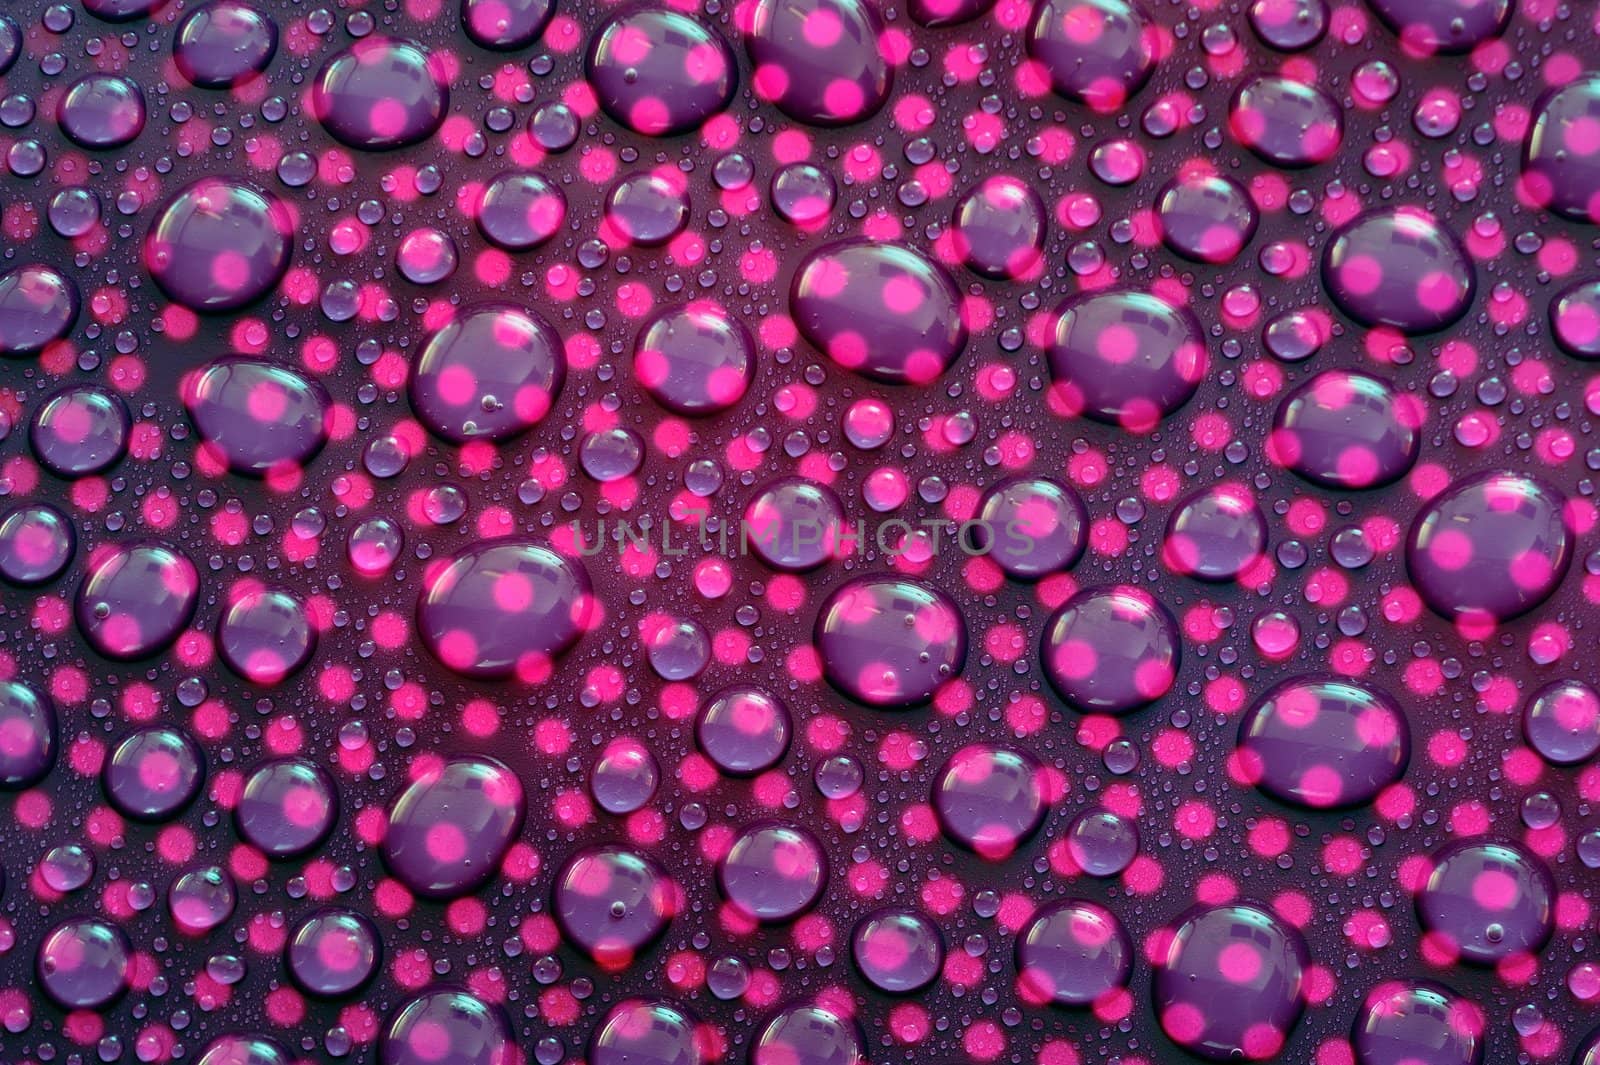 Close-up droplets of water on purple background